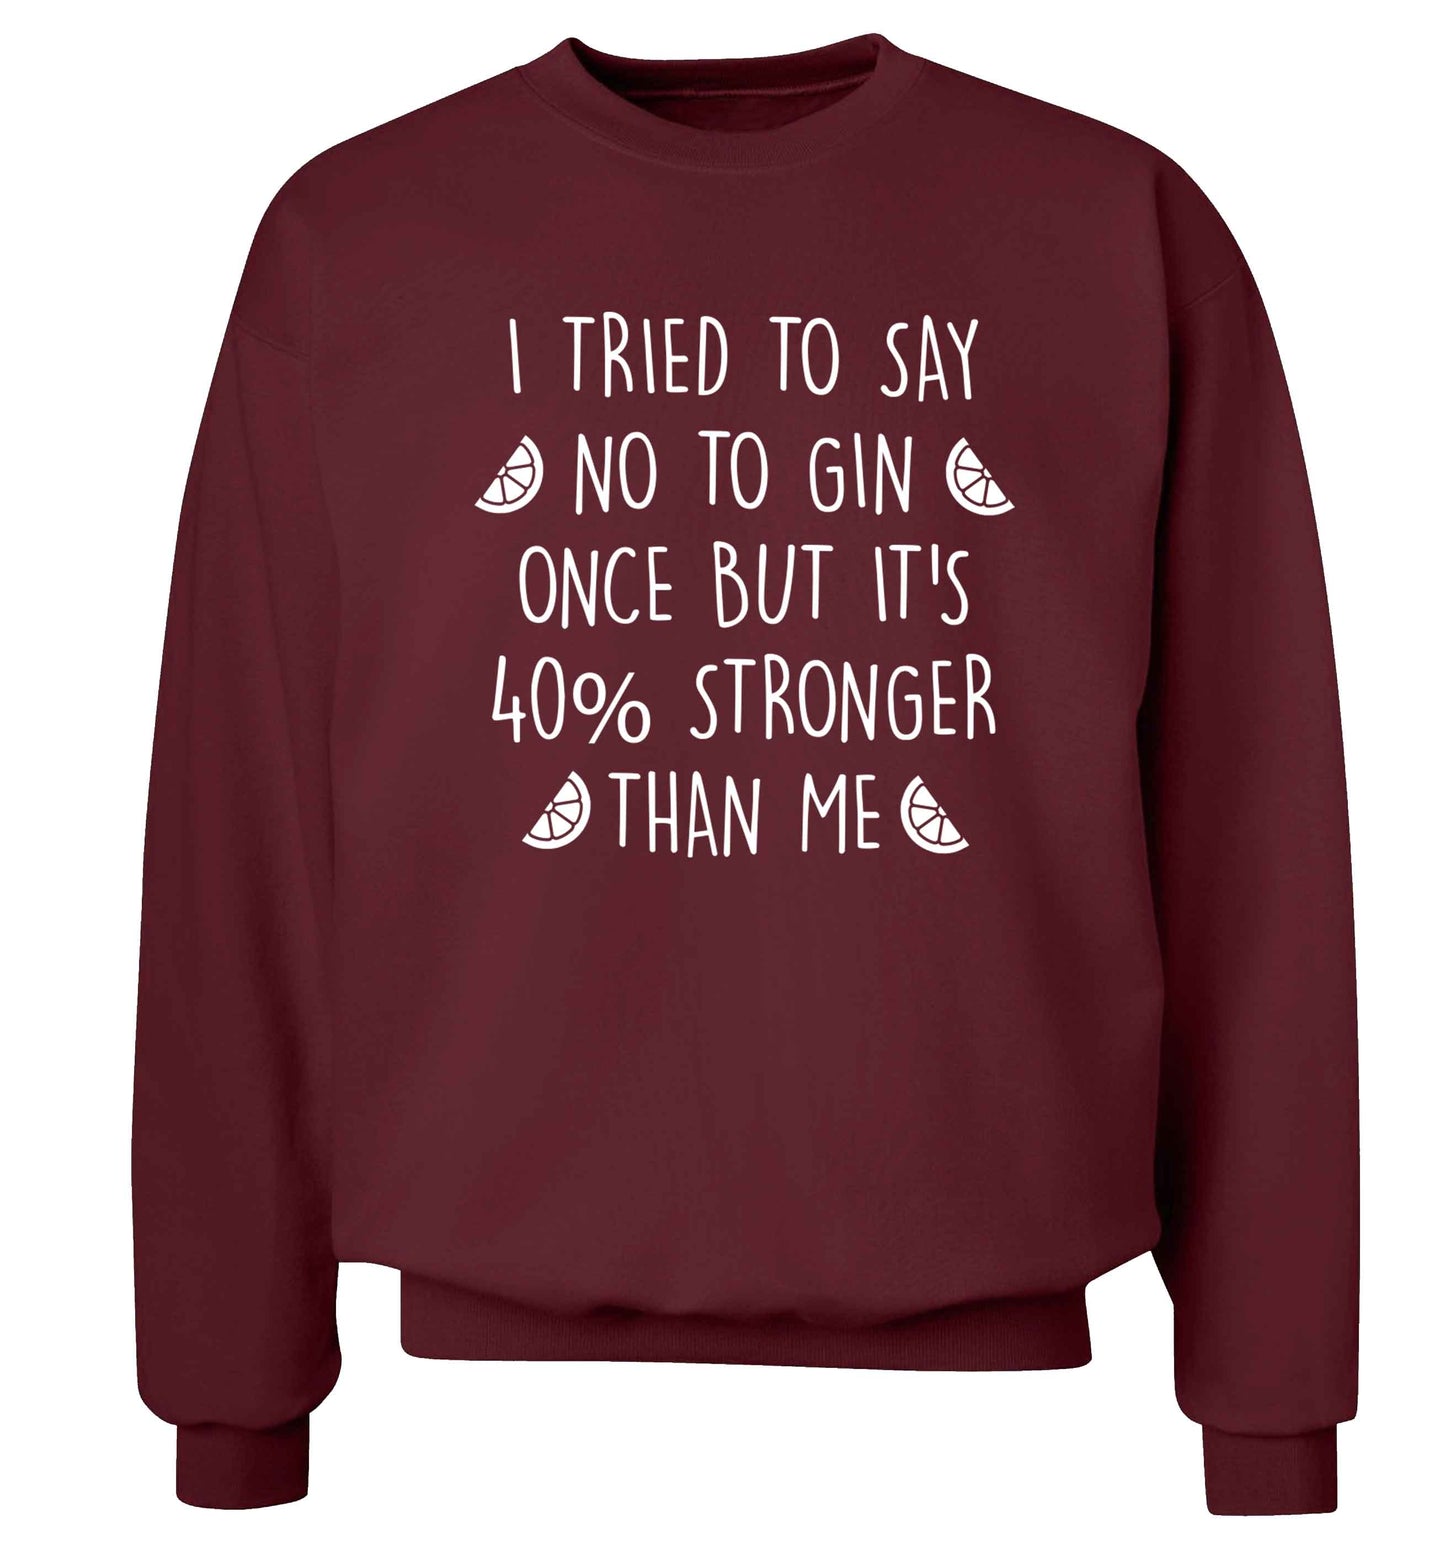 I tried to say no to gin once but it's 40% stronger than me Adult's unisex maroon Sweater 2XL